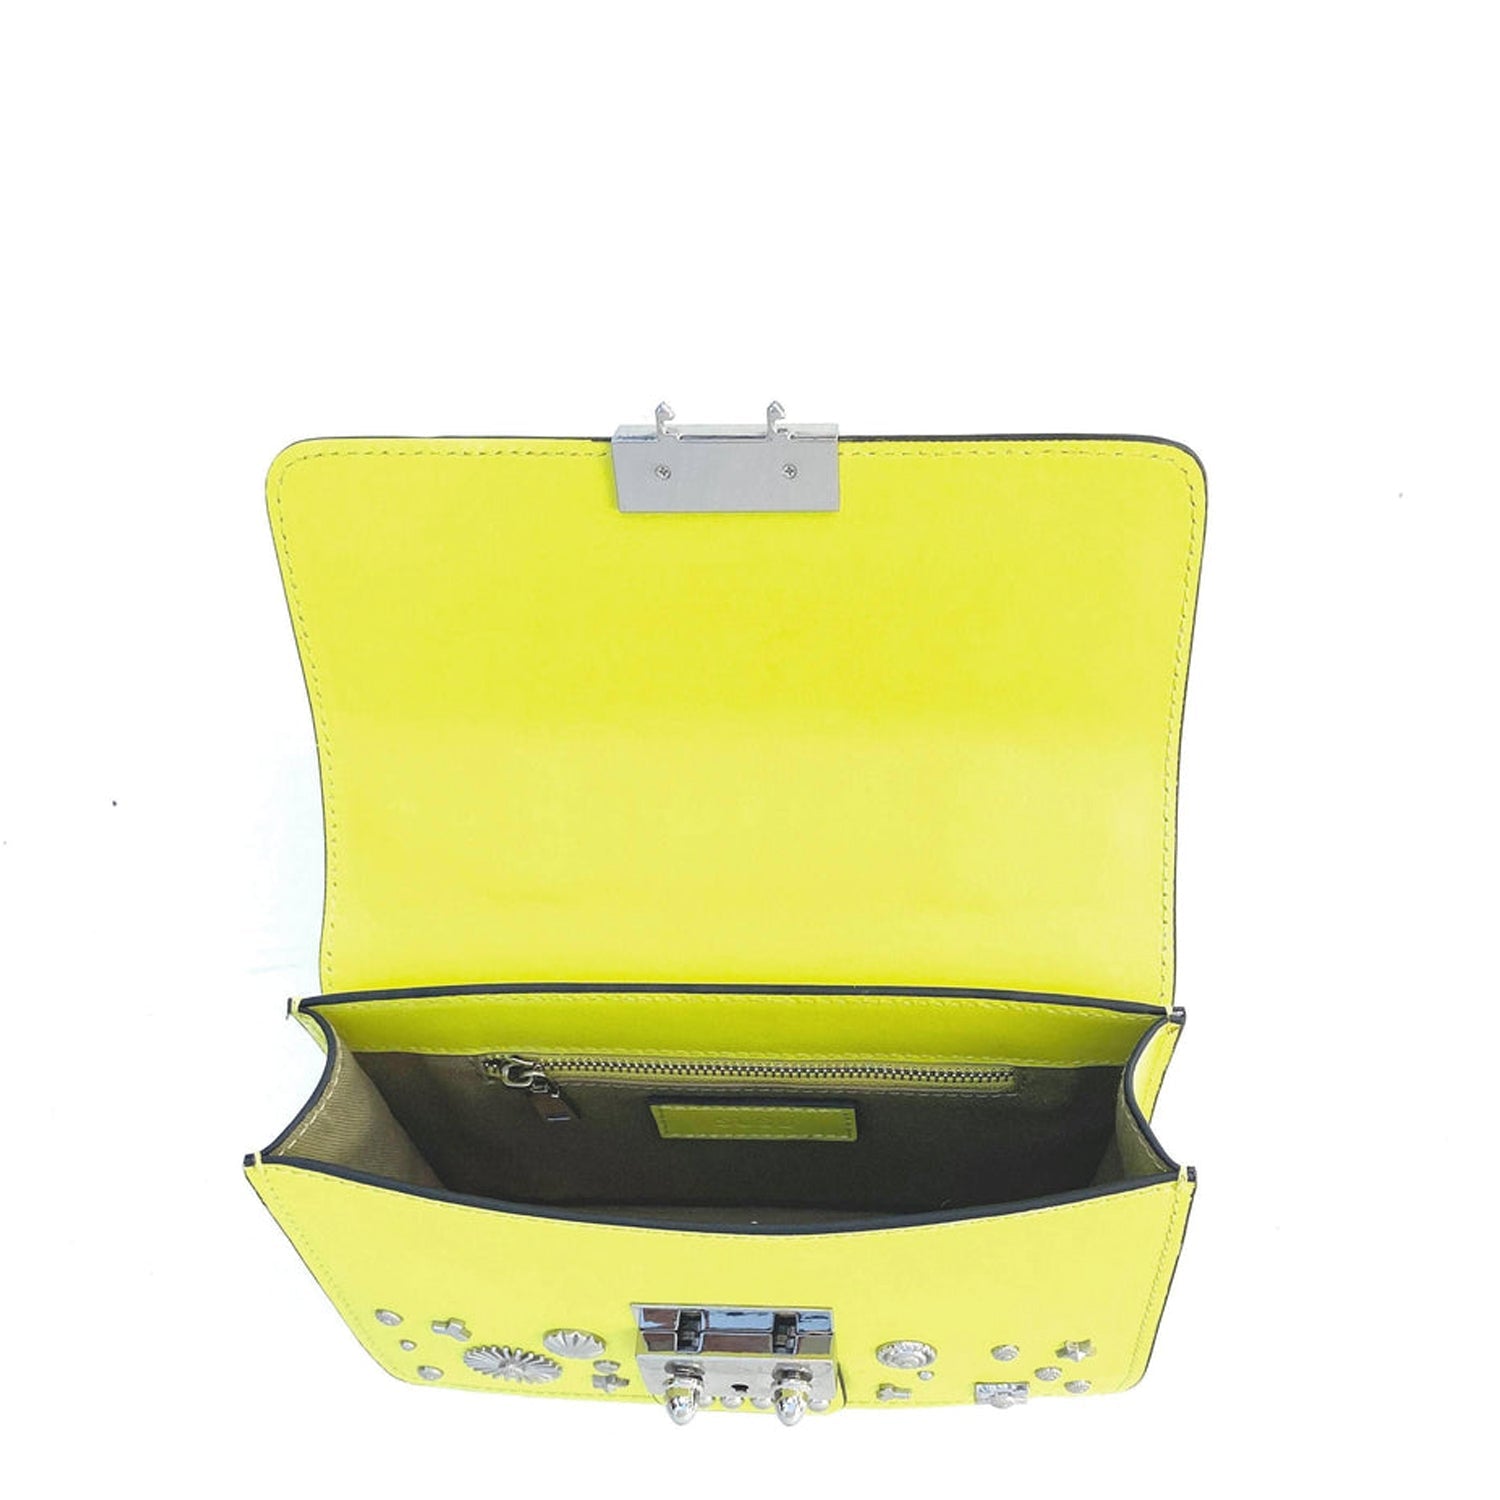 The Hollywood Bright Yellow Studded Leather Crossbody Bag - Guy Christopher 